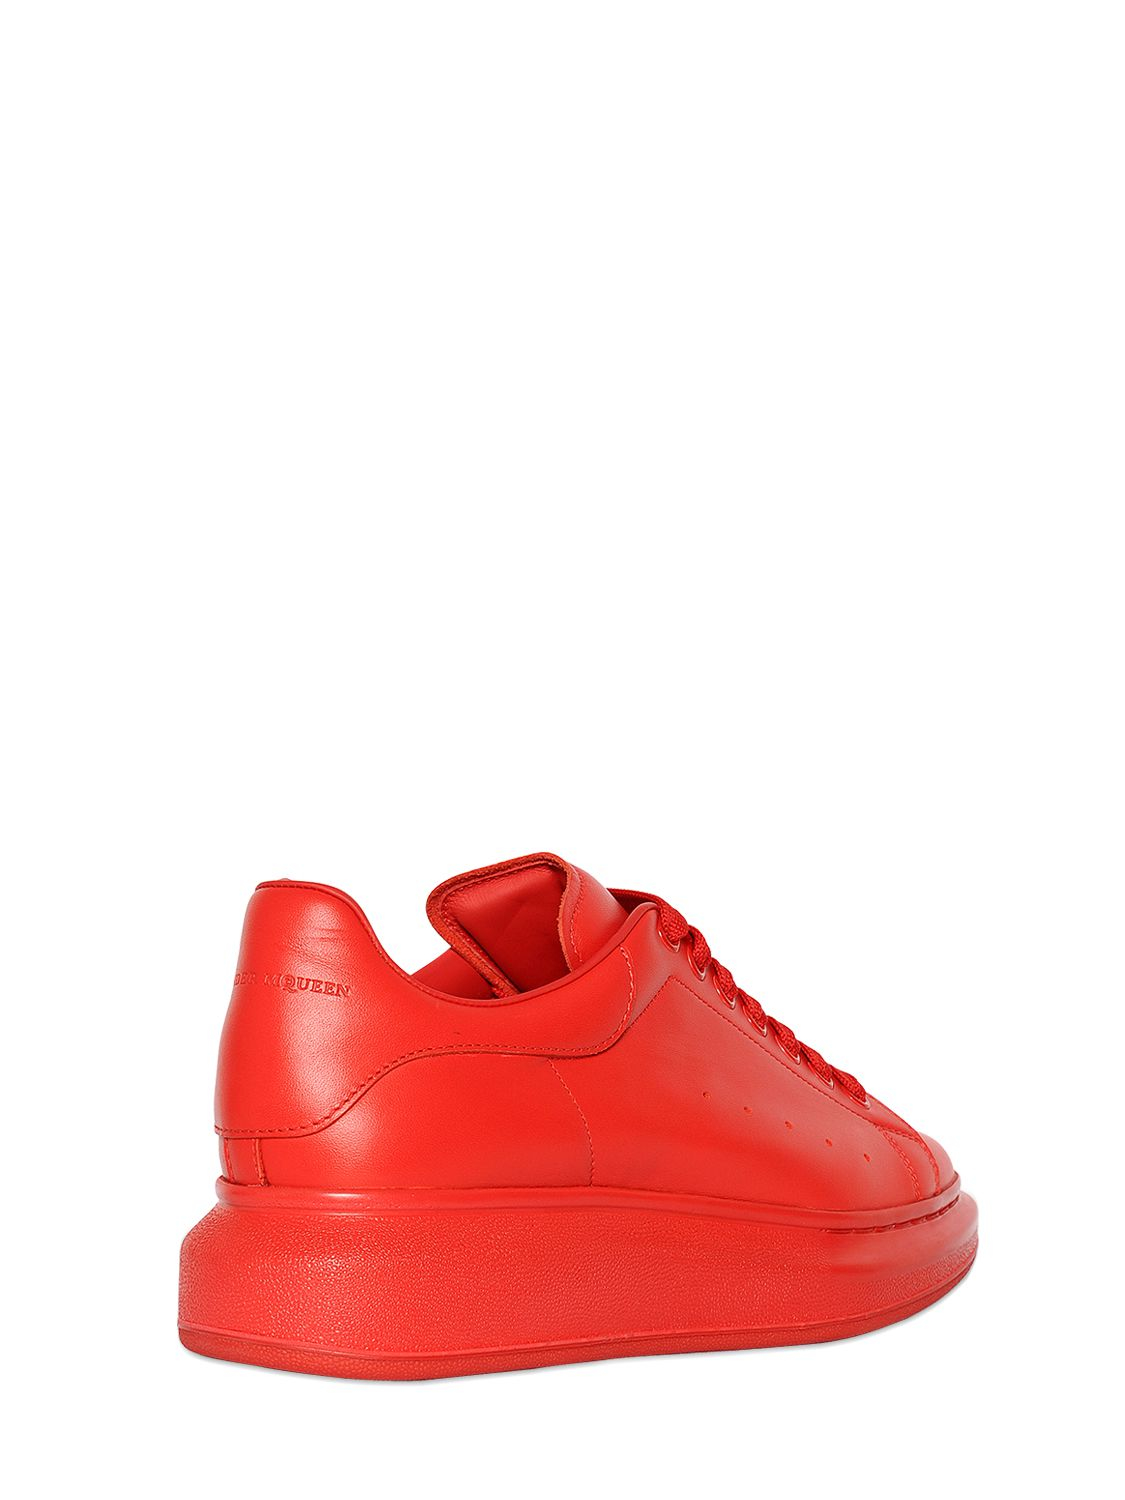 Alexander McQueen Exaggerated-sole Leather Sneakers in Red for Men - Lyst